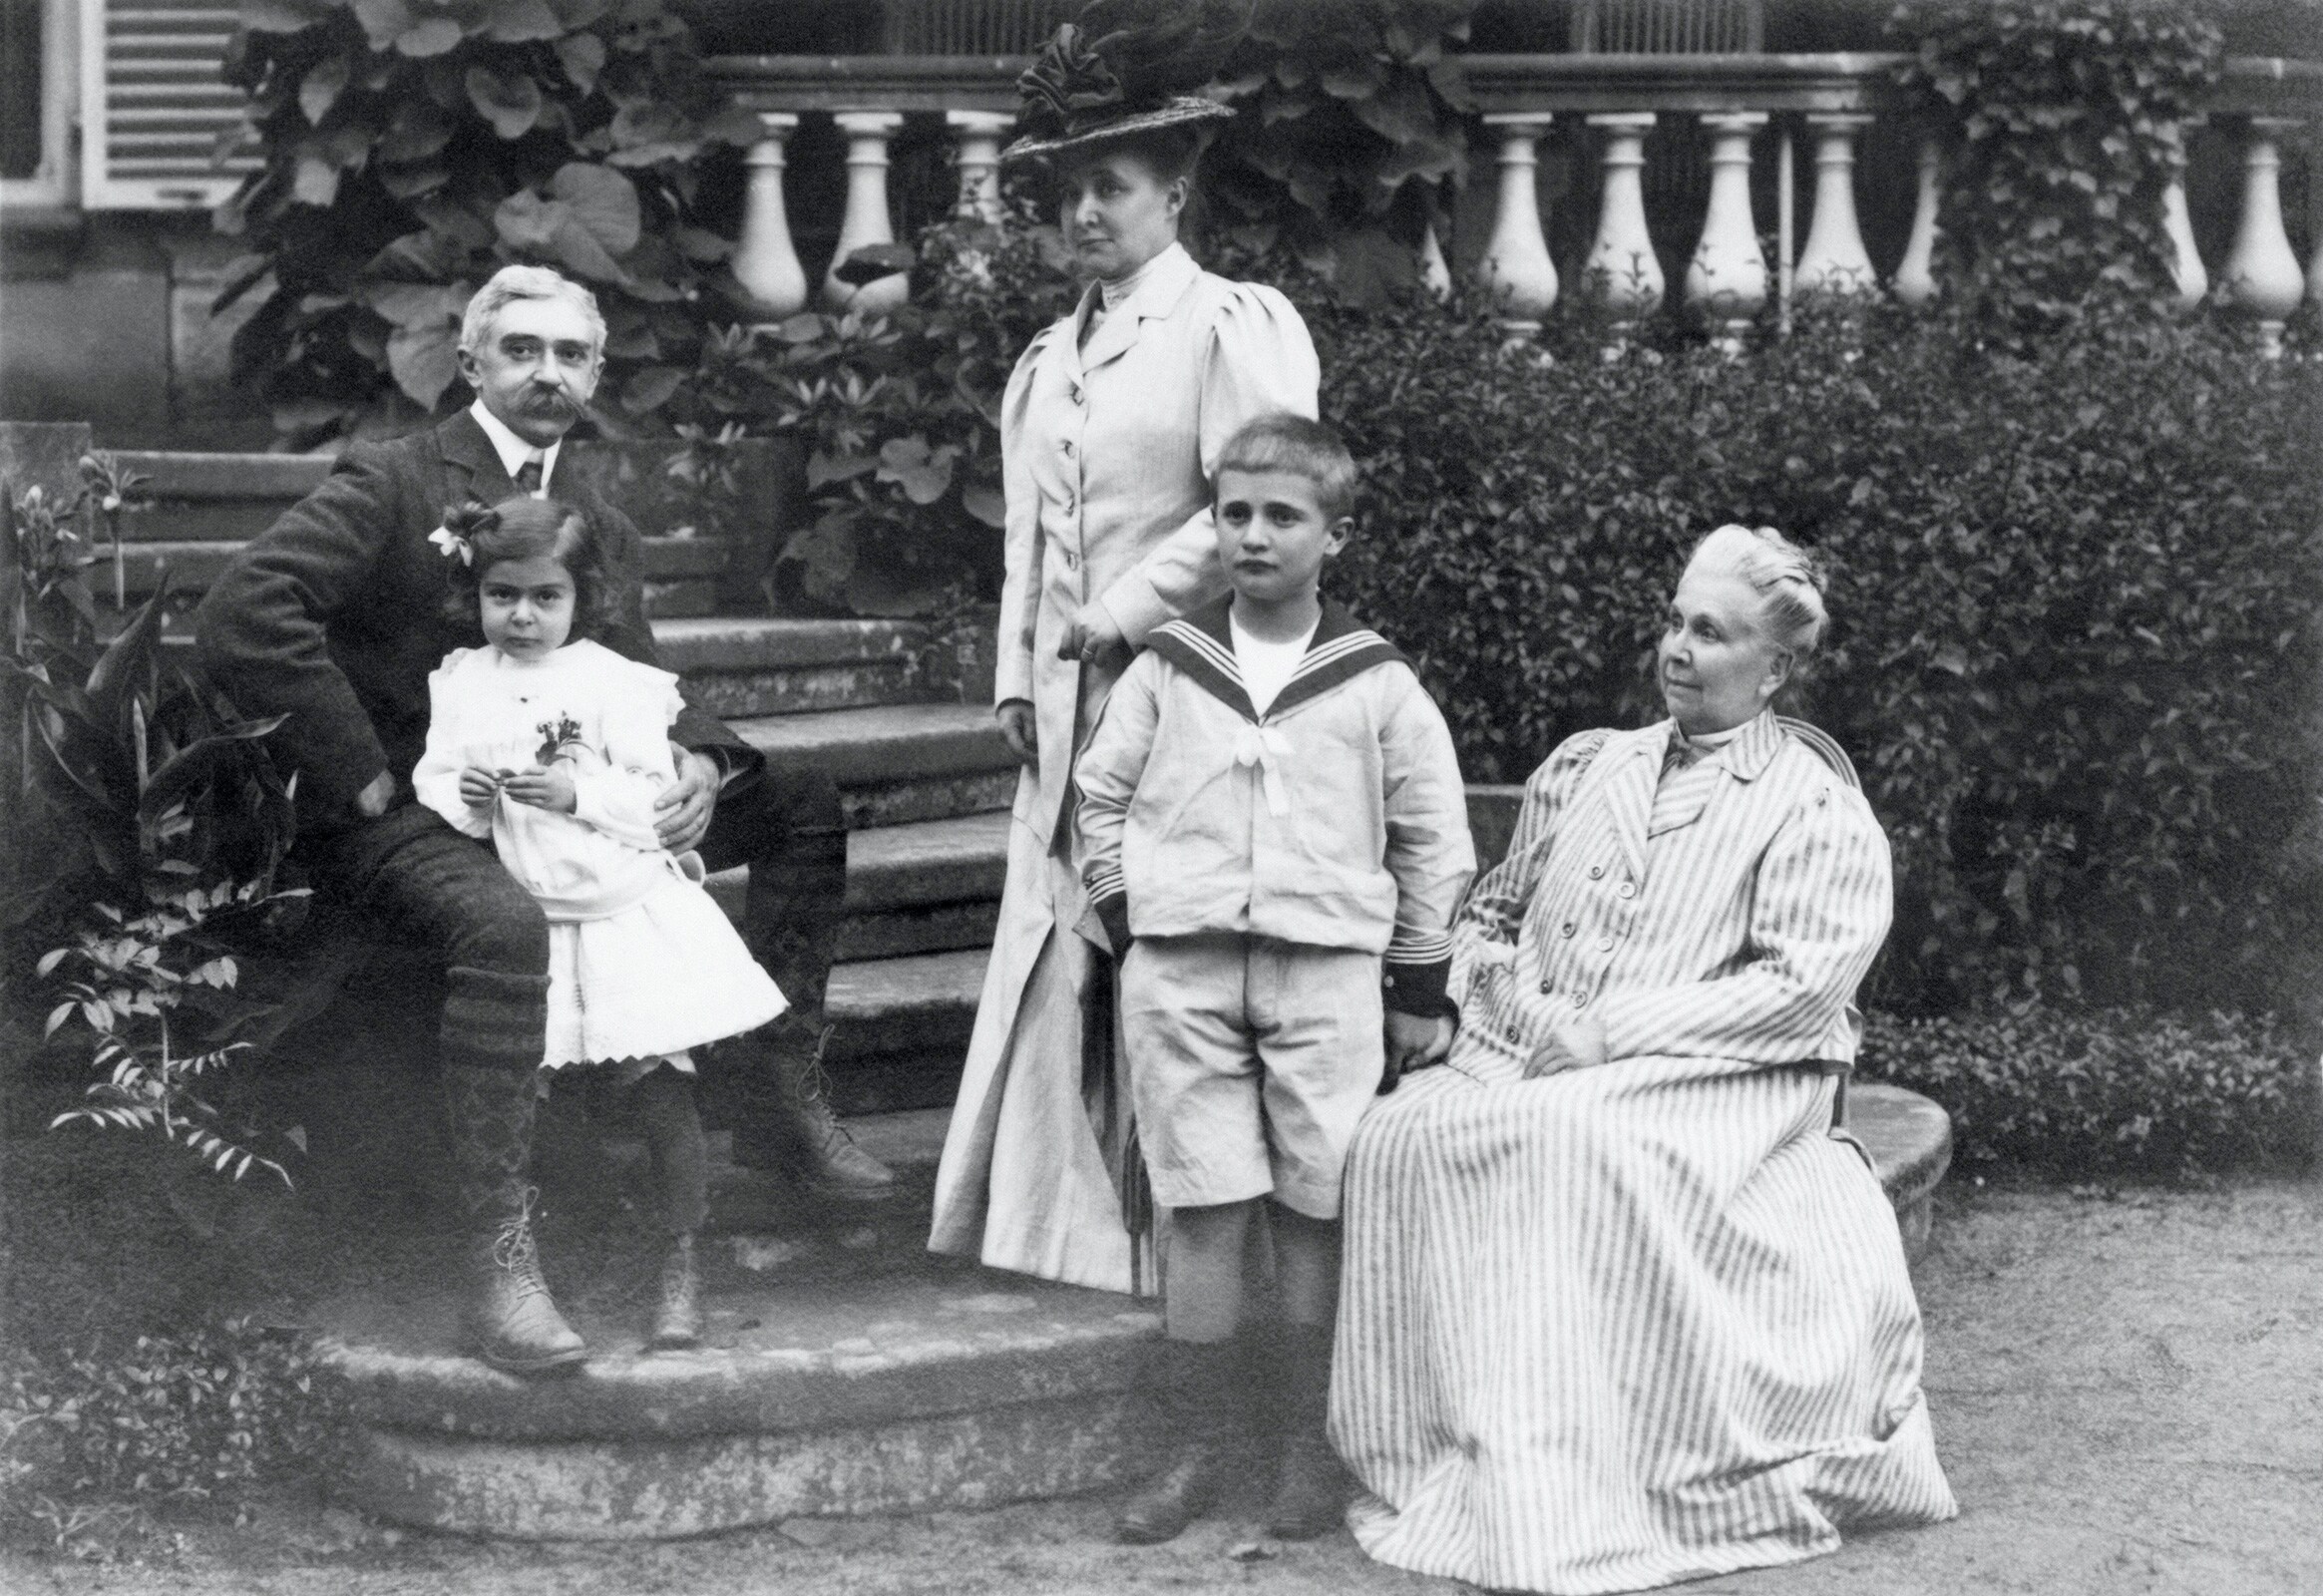 Family Photograph - Baron Pierre de COUBERTIN, his wife Marie ROTHAN, Baronness de COUBERTIN, his mother-in-law  Mrs. Rothan and their children : Renée and Jacques de COUBERTIN 